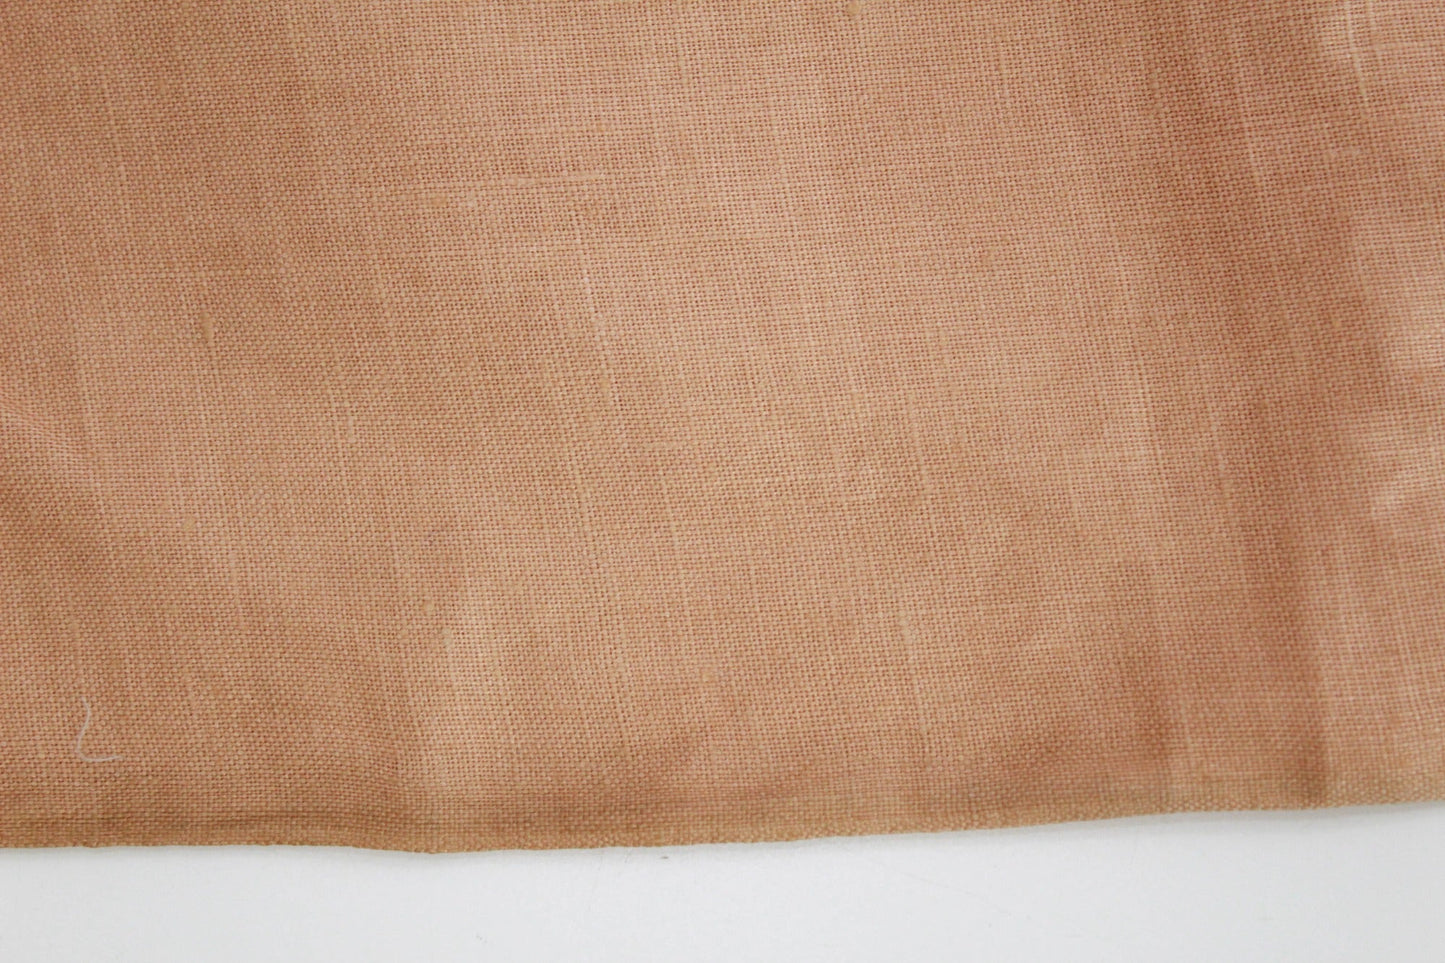 1950s Peach Pink Linen Fabric, 1.38 Yards Long x 2.23 Yards Wide